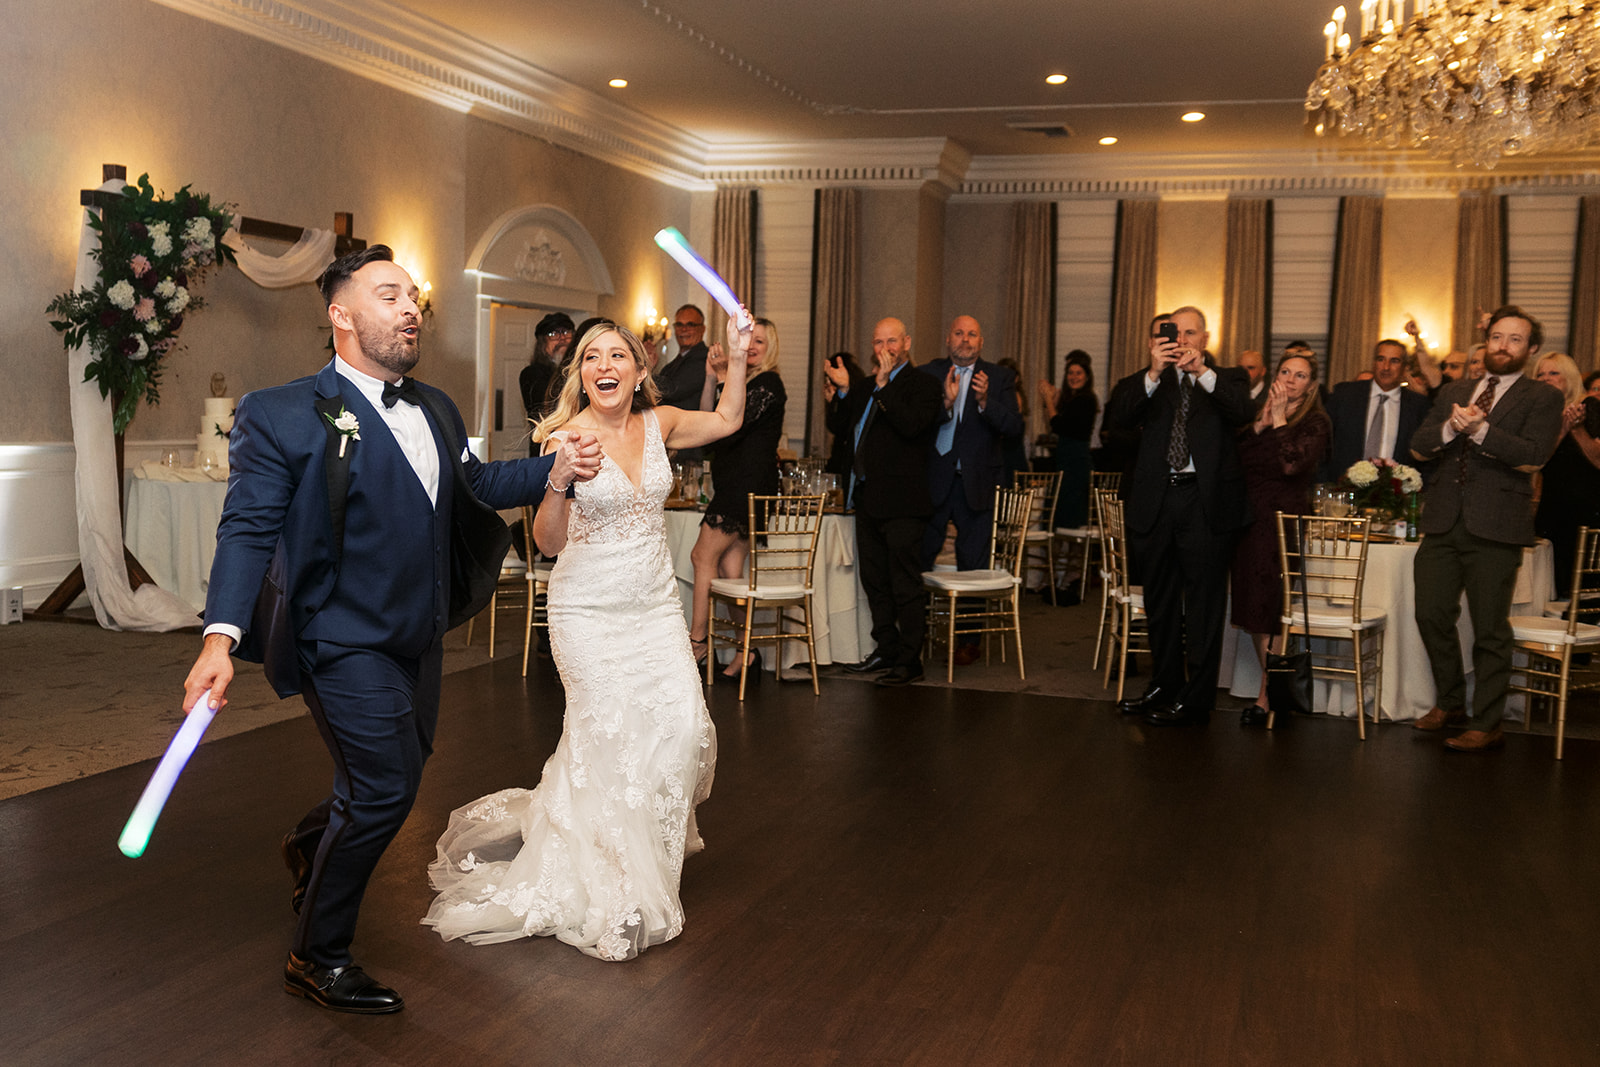 Newlyweds enter their The Belle of Blue Bell wedding reception carrying light sticks and dancing